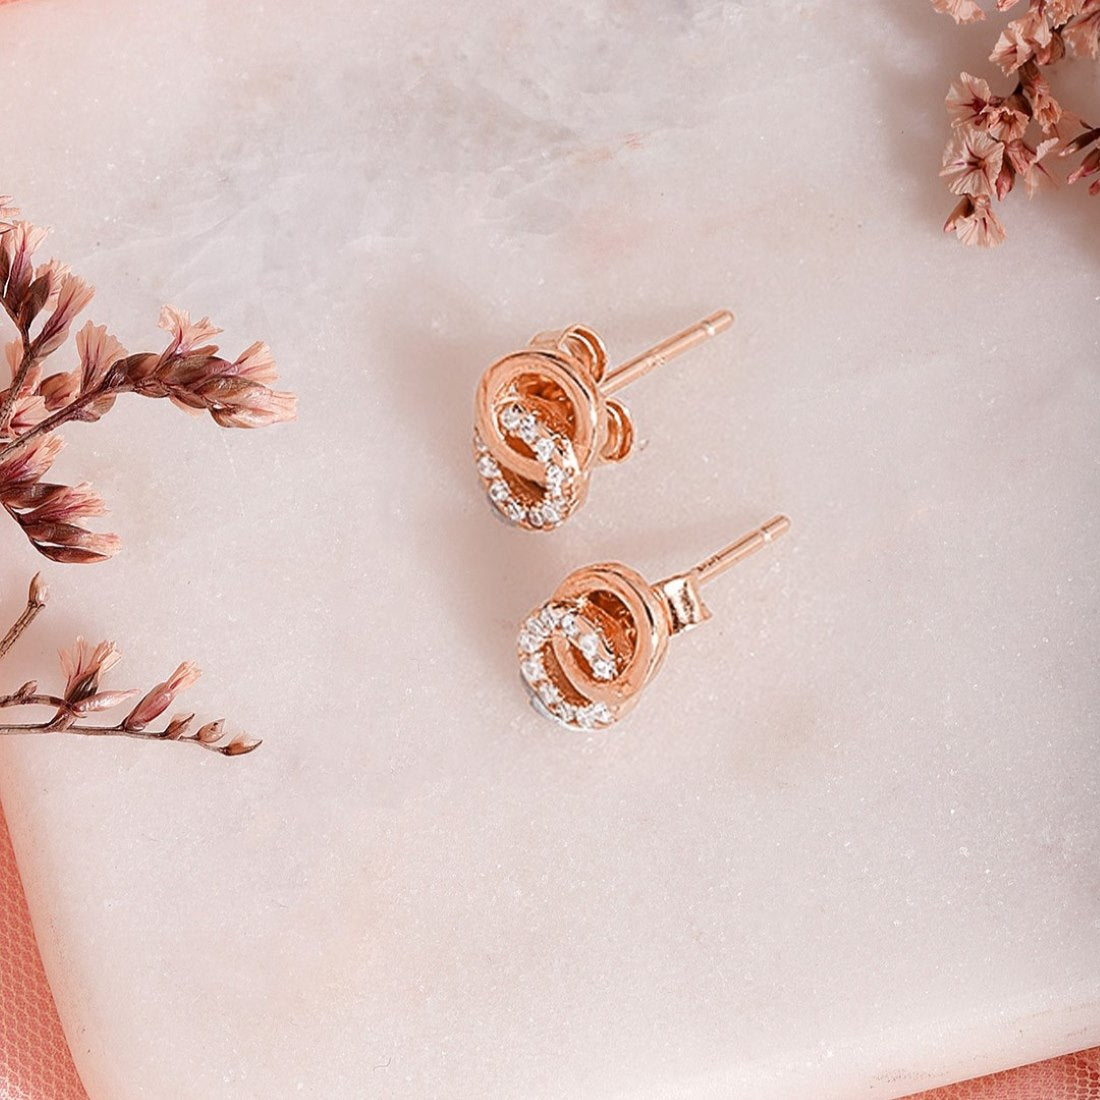 Infinite Radiance 925 Sterling Silver Rose Gold-Plated Infinity Earrings